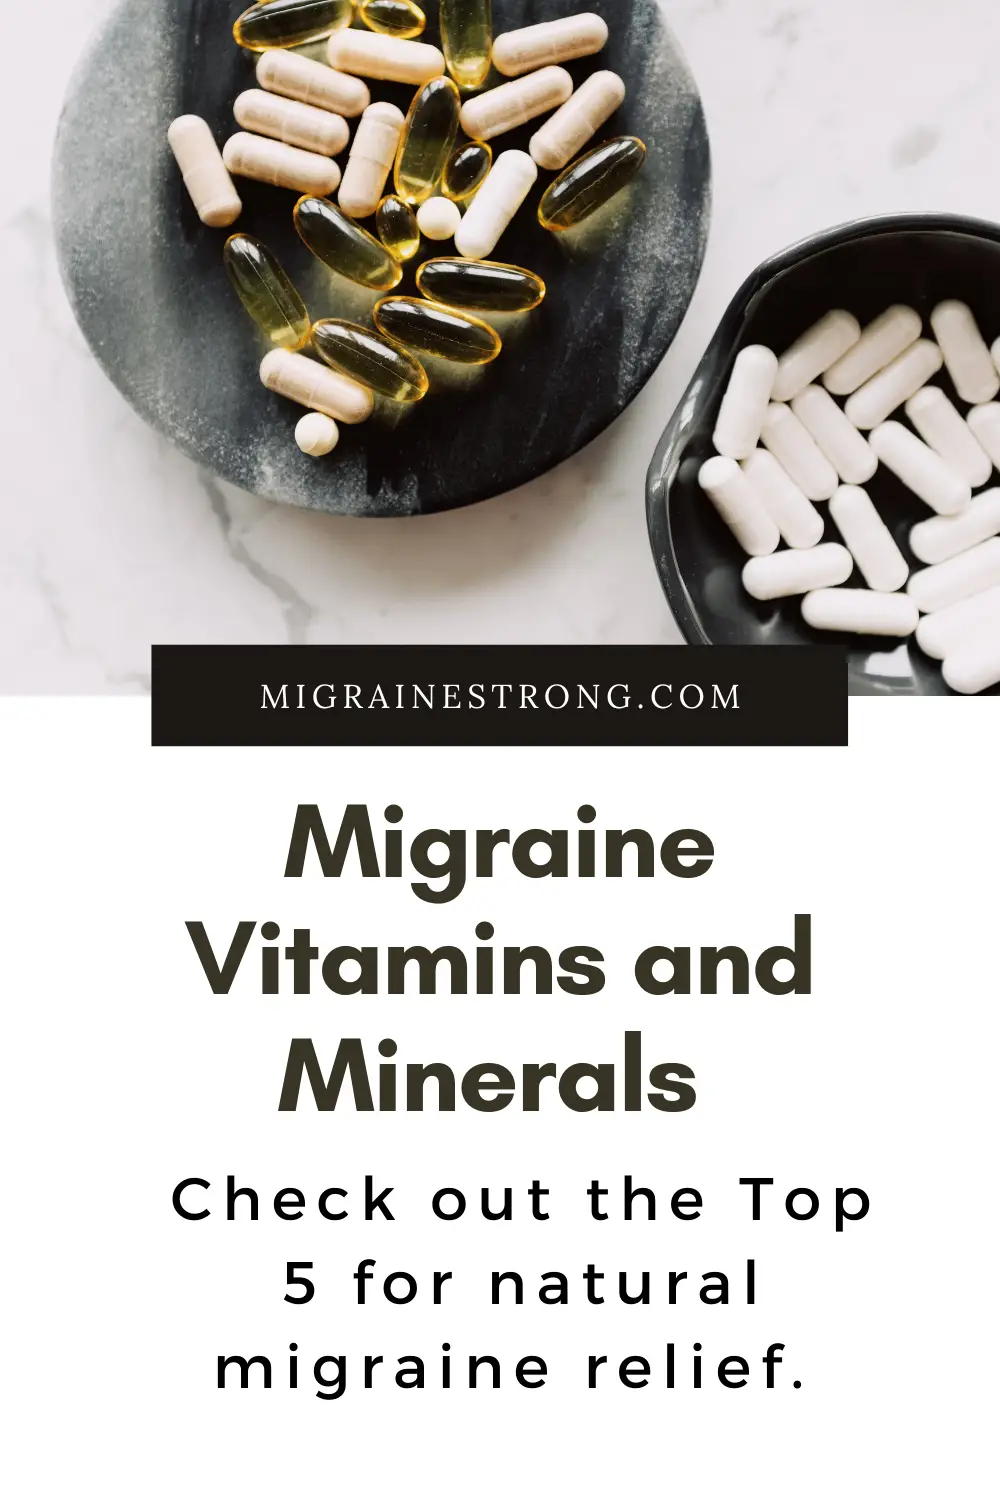 Migraine Supplements- The Big 5 You Should Know About